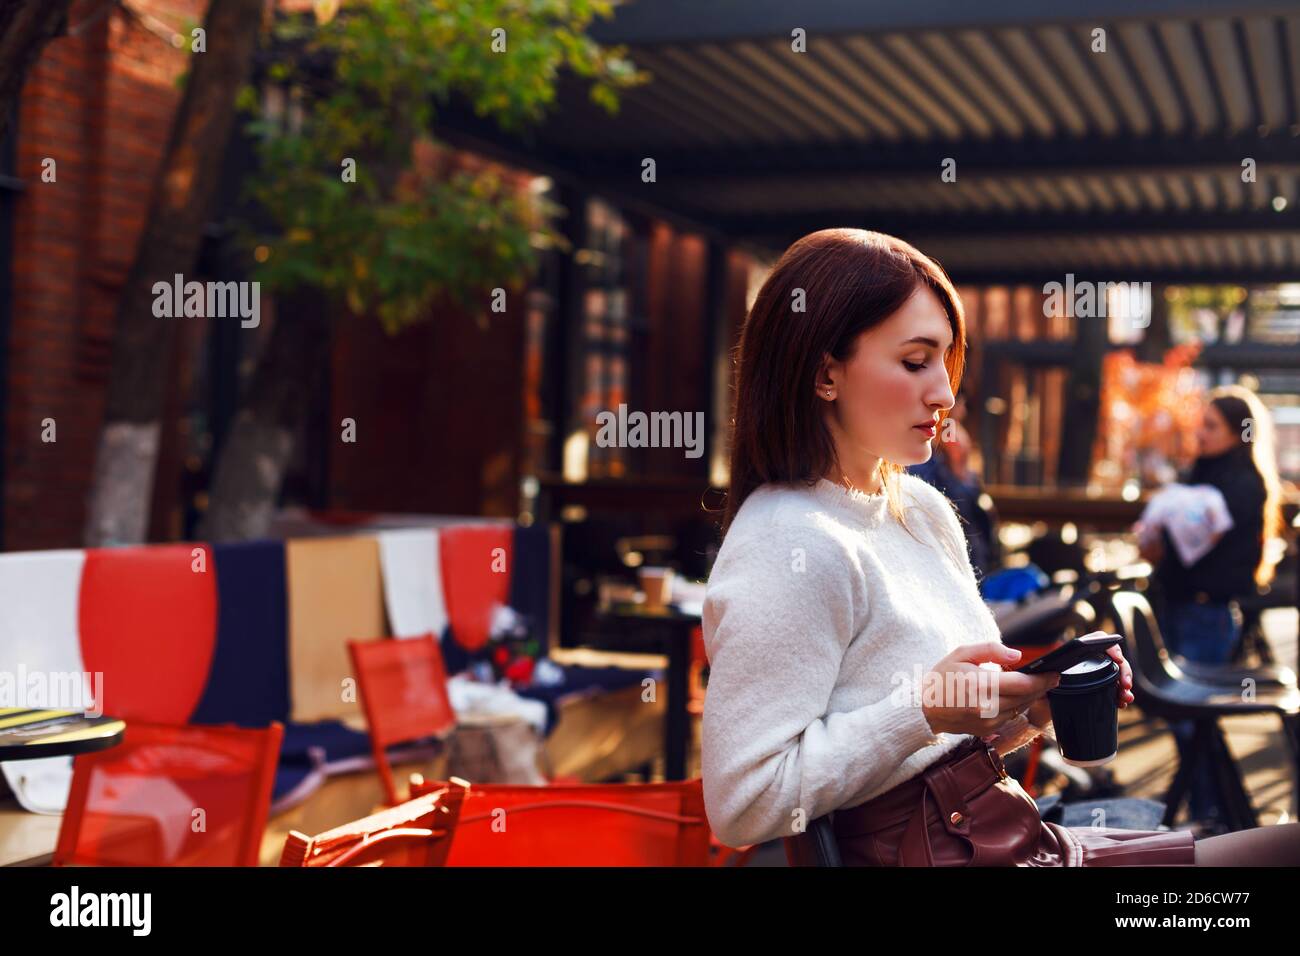 Woman sits at outdoor cafe terrace with takeaway coffee and swipes something on her smartphone. Stock Photo